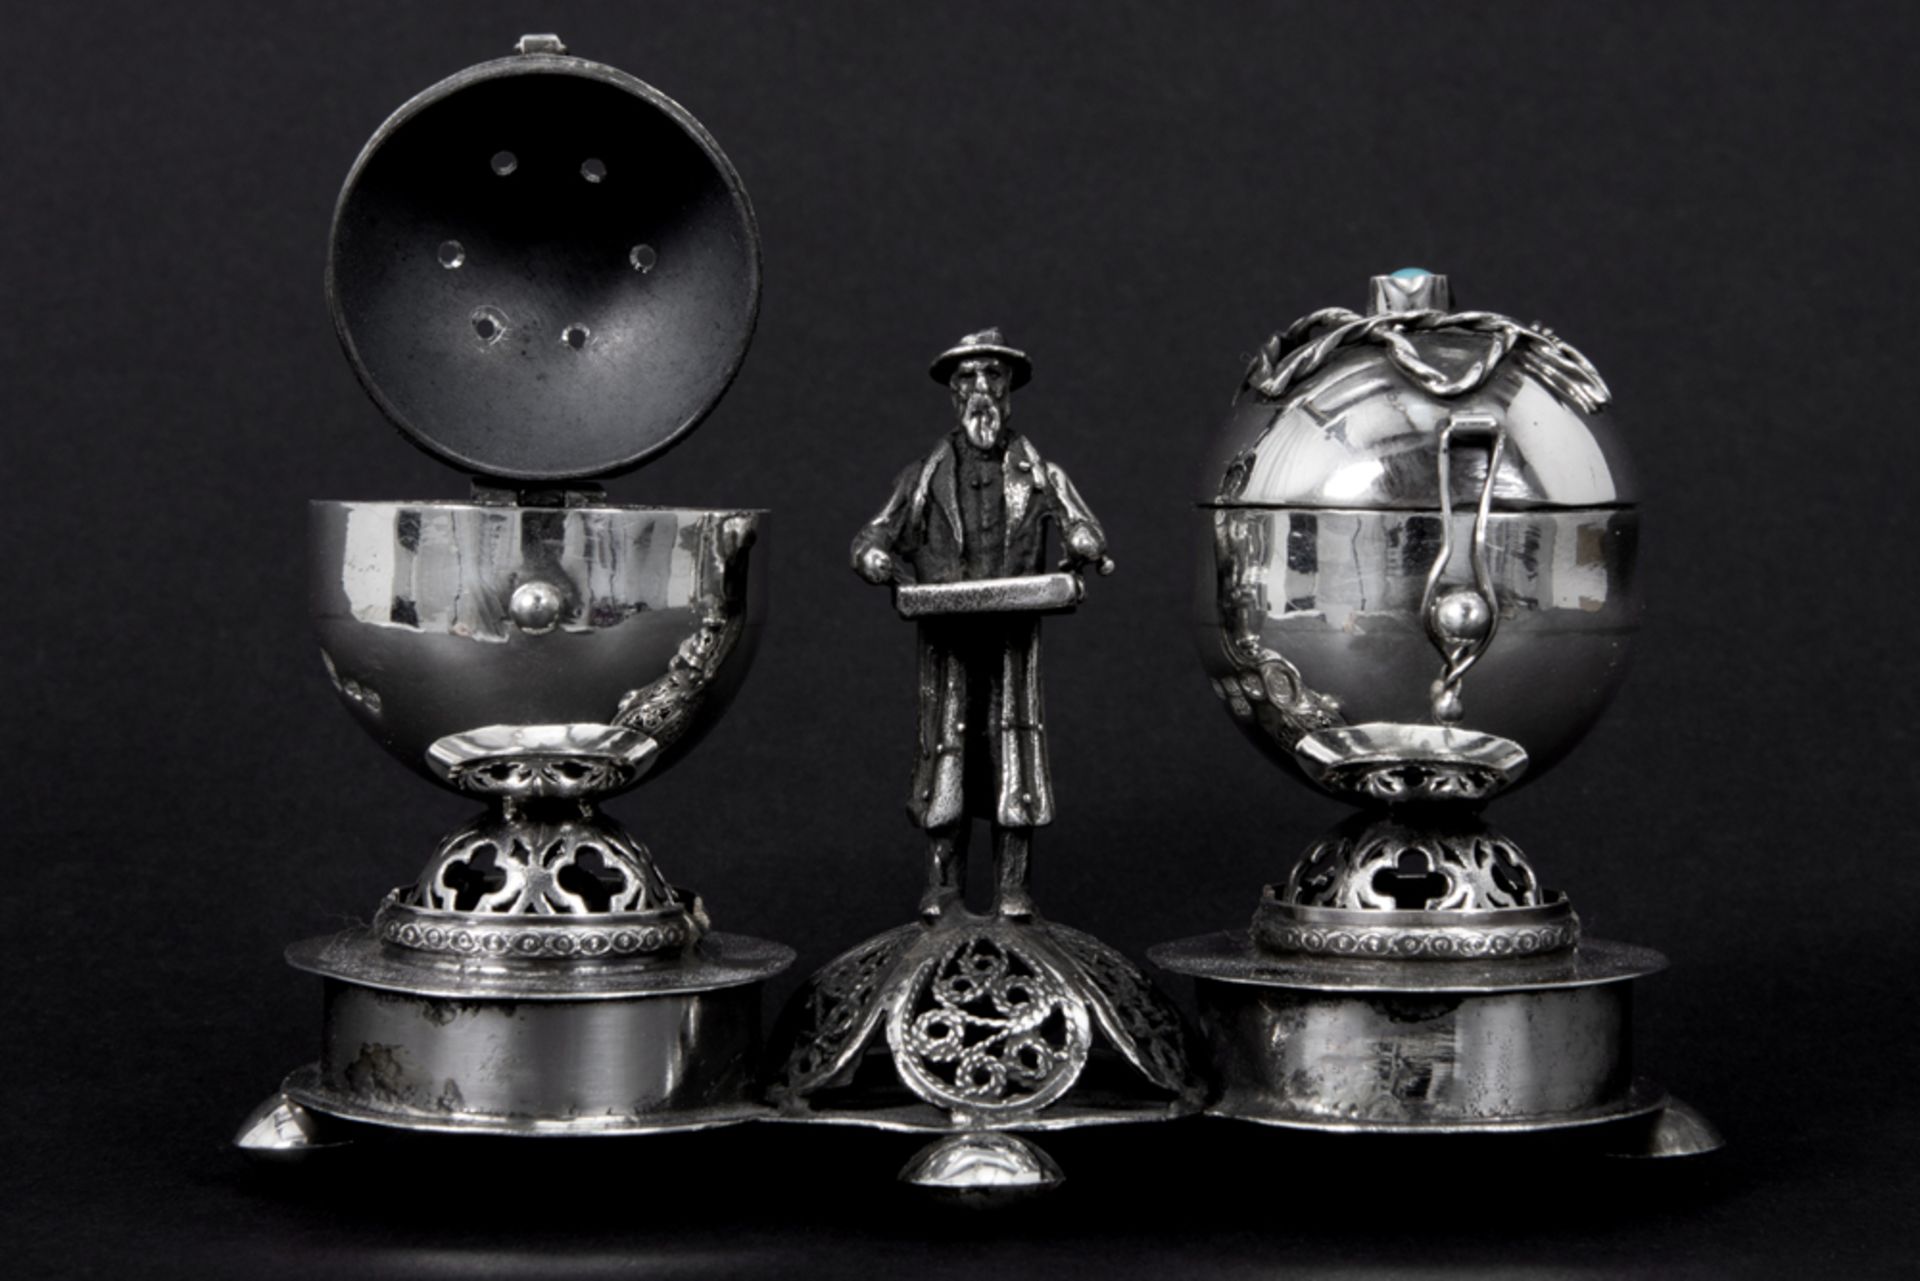 antique Polish salt cellar with two ovoid containers and a standing male figure - in "Warshau 84" - Bild 4 aus 6